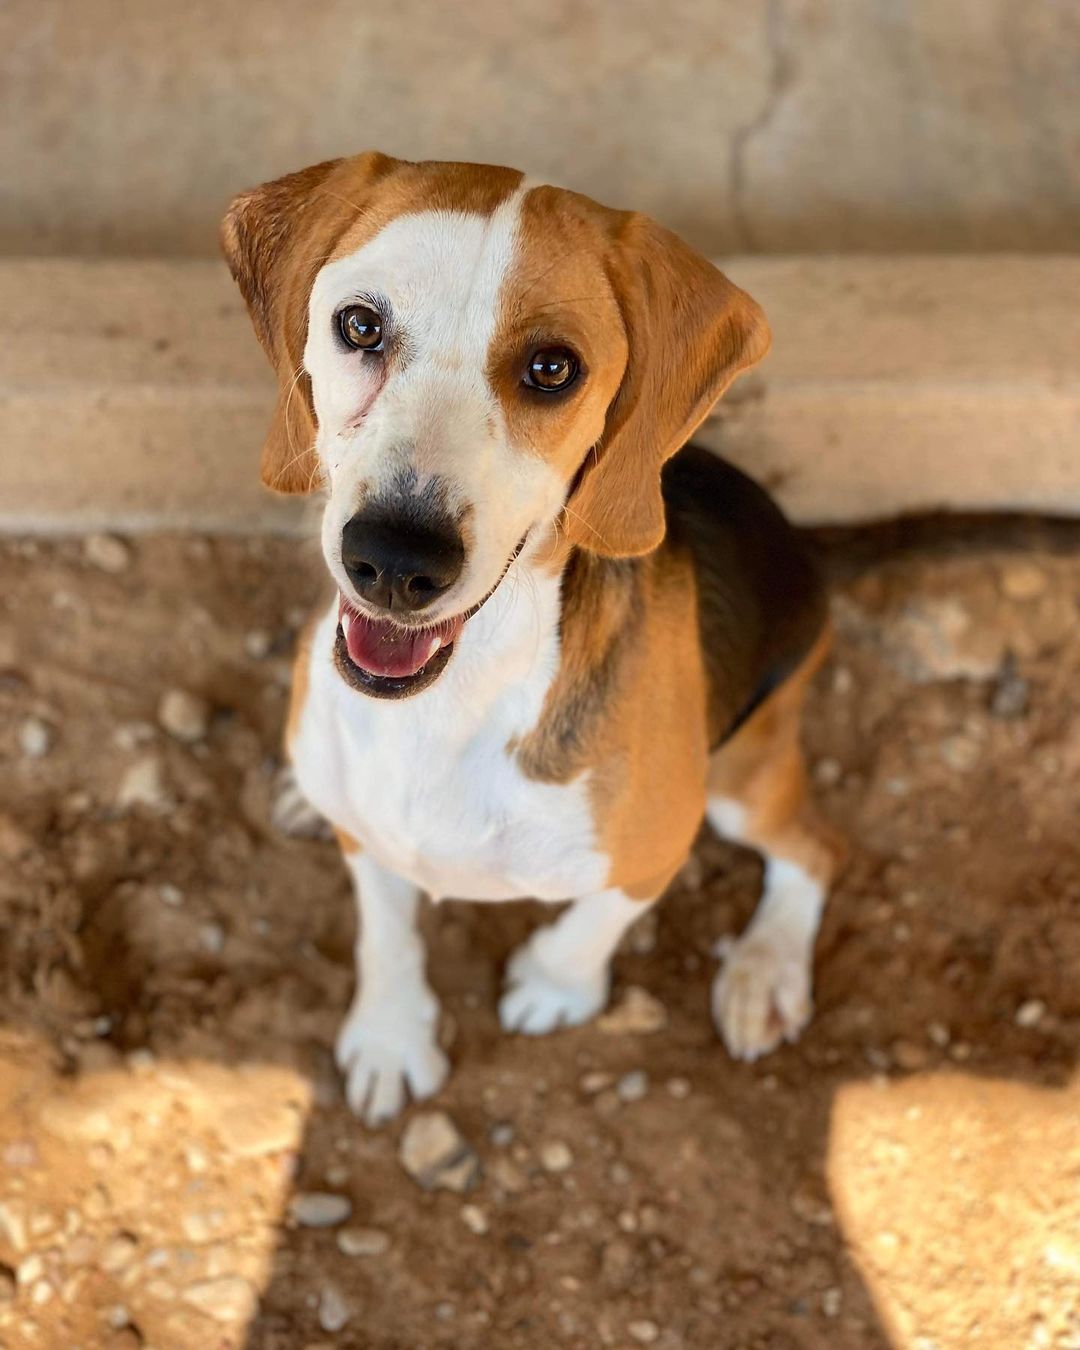 This is Copper and she is a 11 month old Beagle looking for her furr-ever home! She is not quite ready for adoption yet but she is coming soon so send in an application today to pre-adopt Copper!